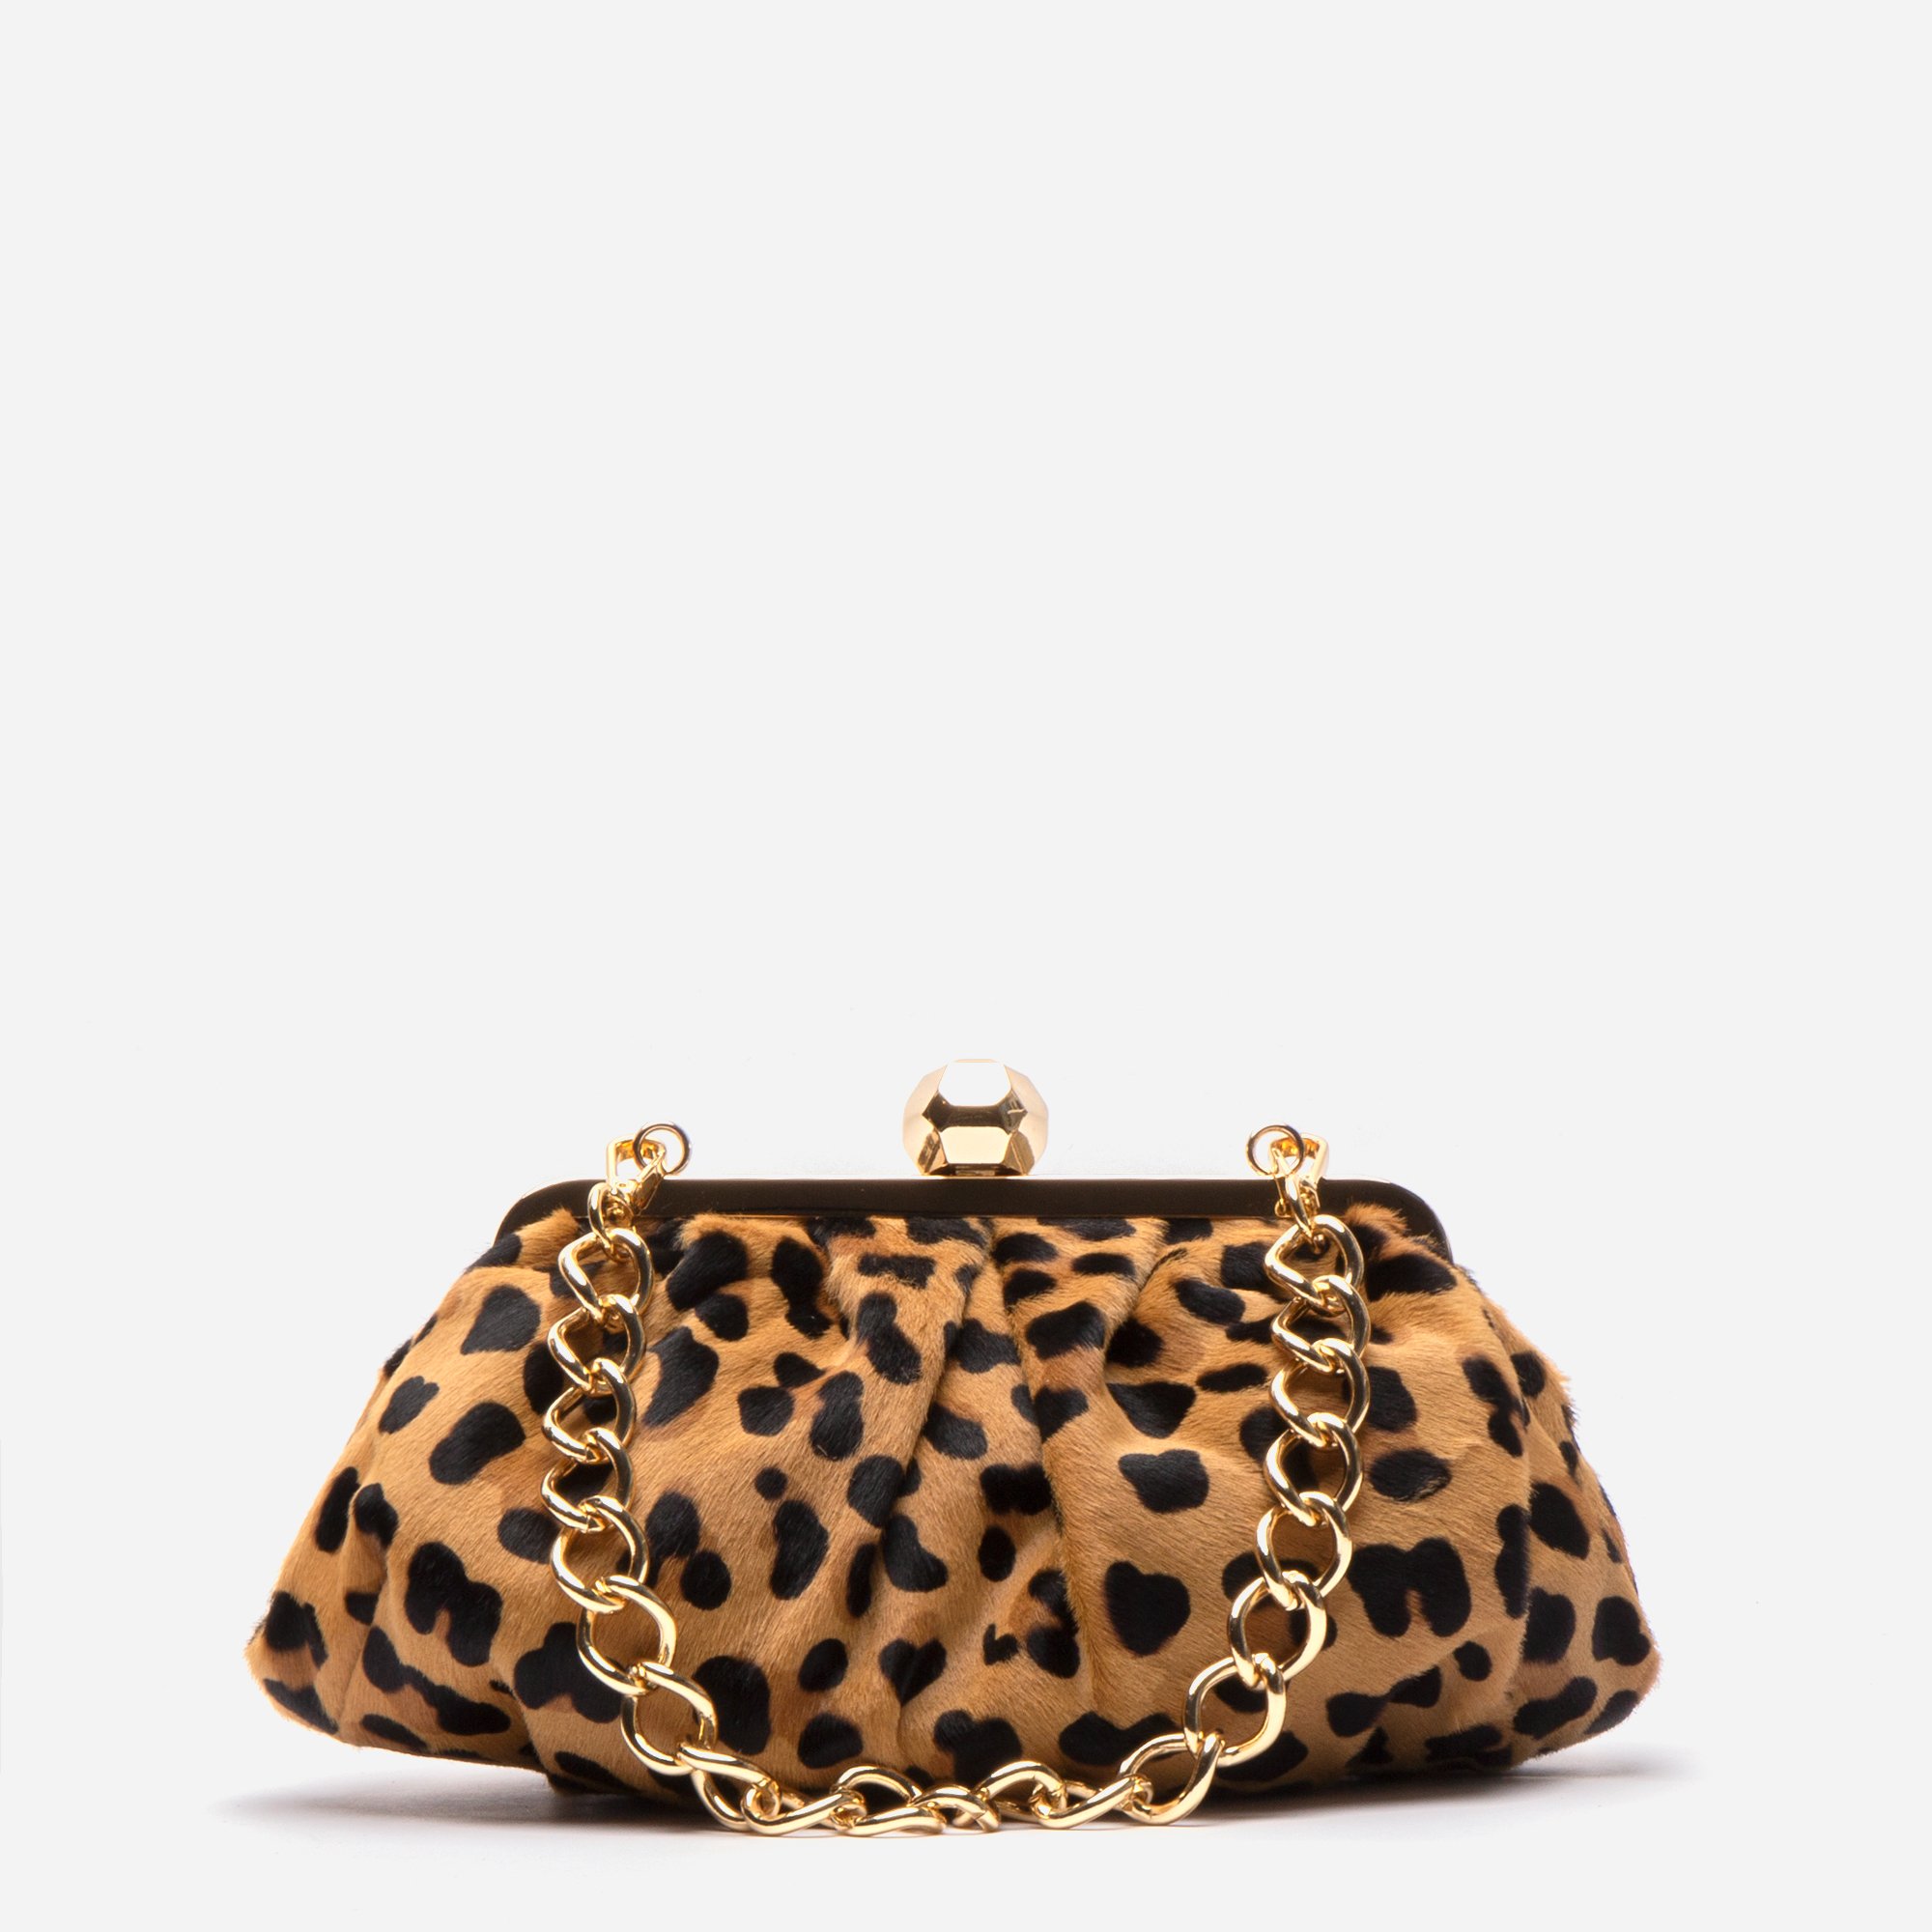 Leopard Print Clutch with a Gold Chain Strap